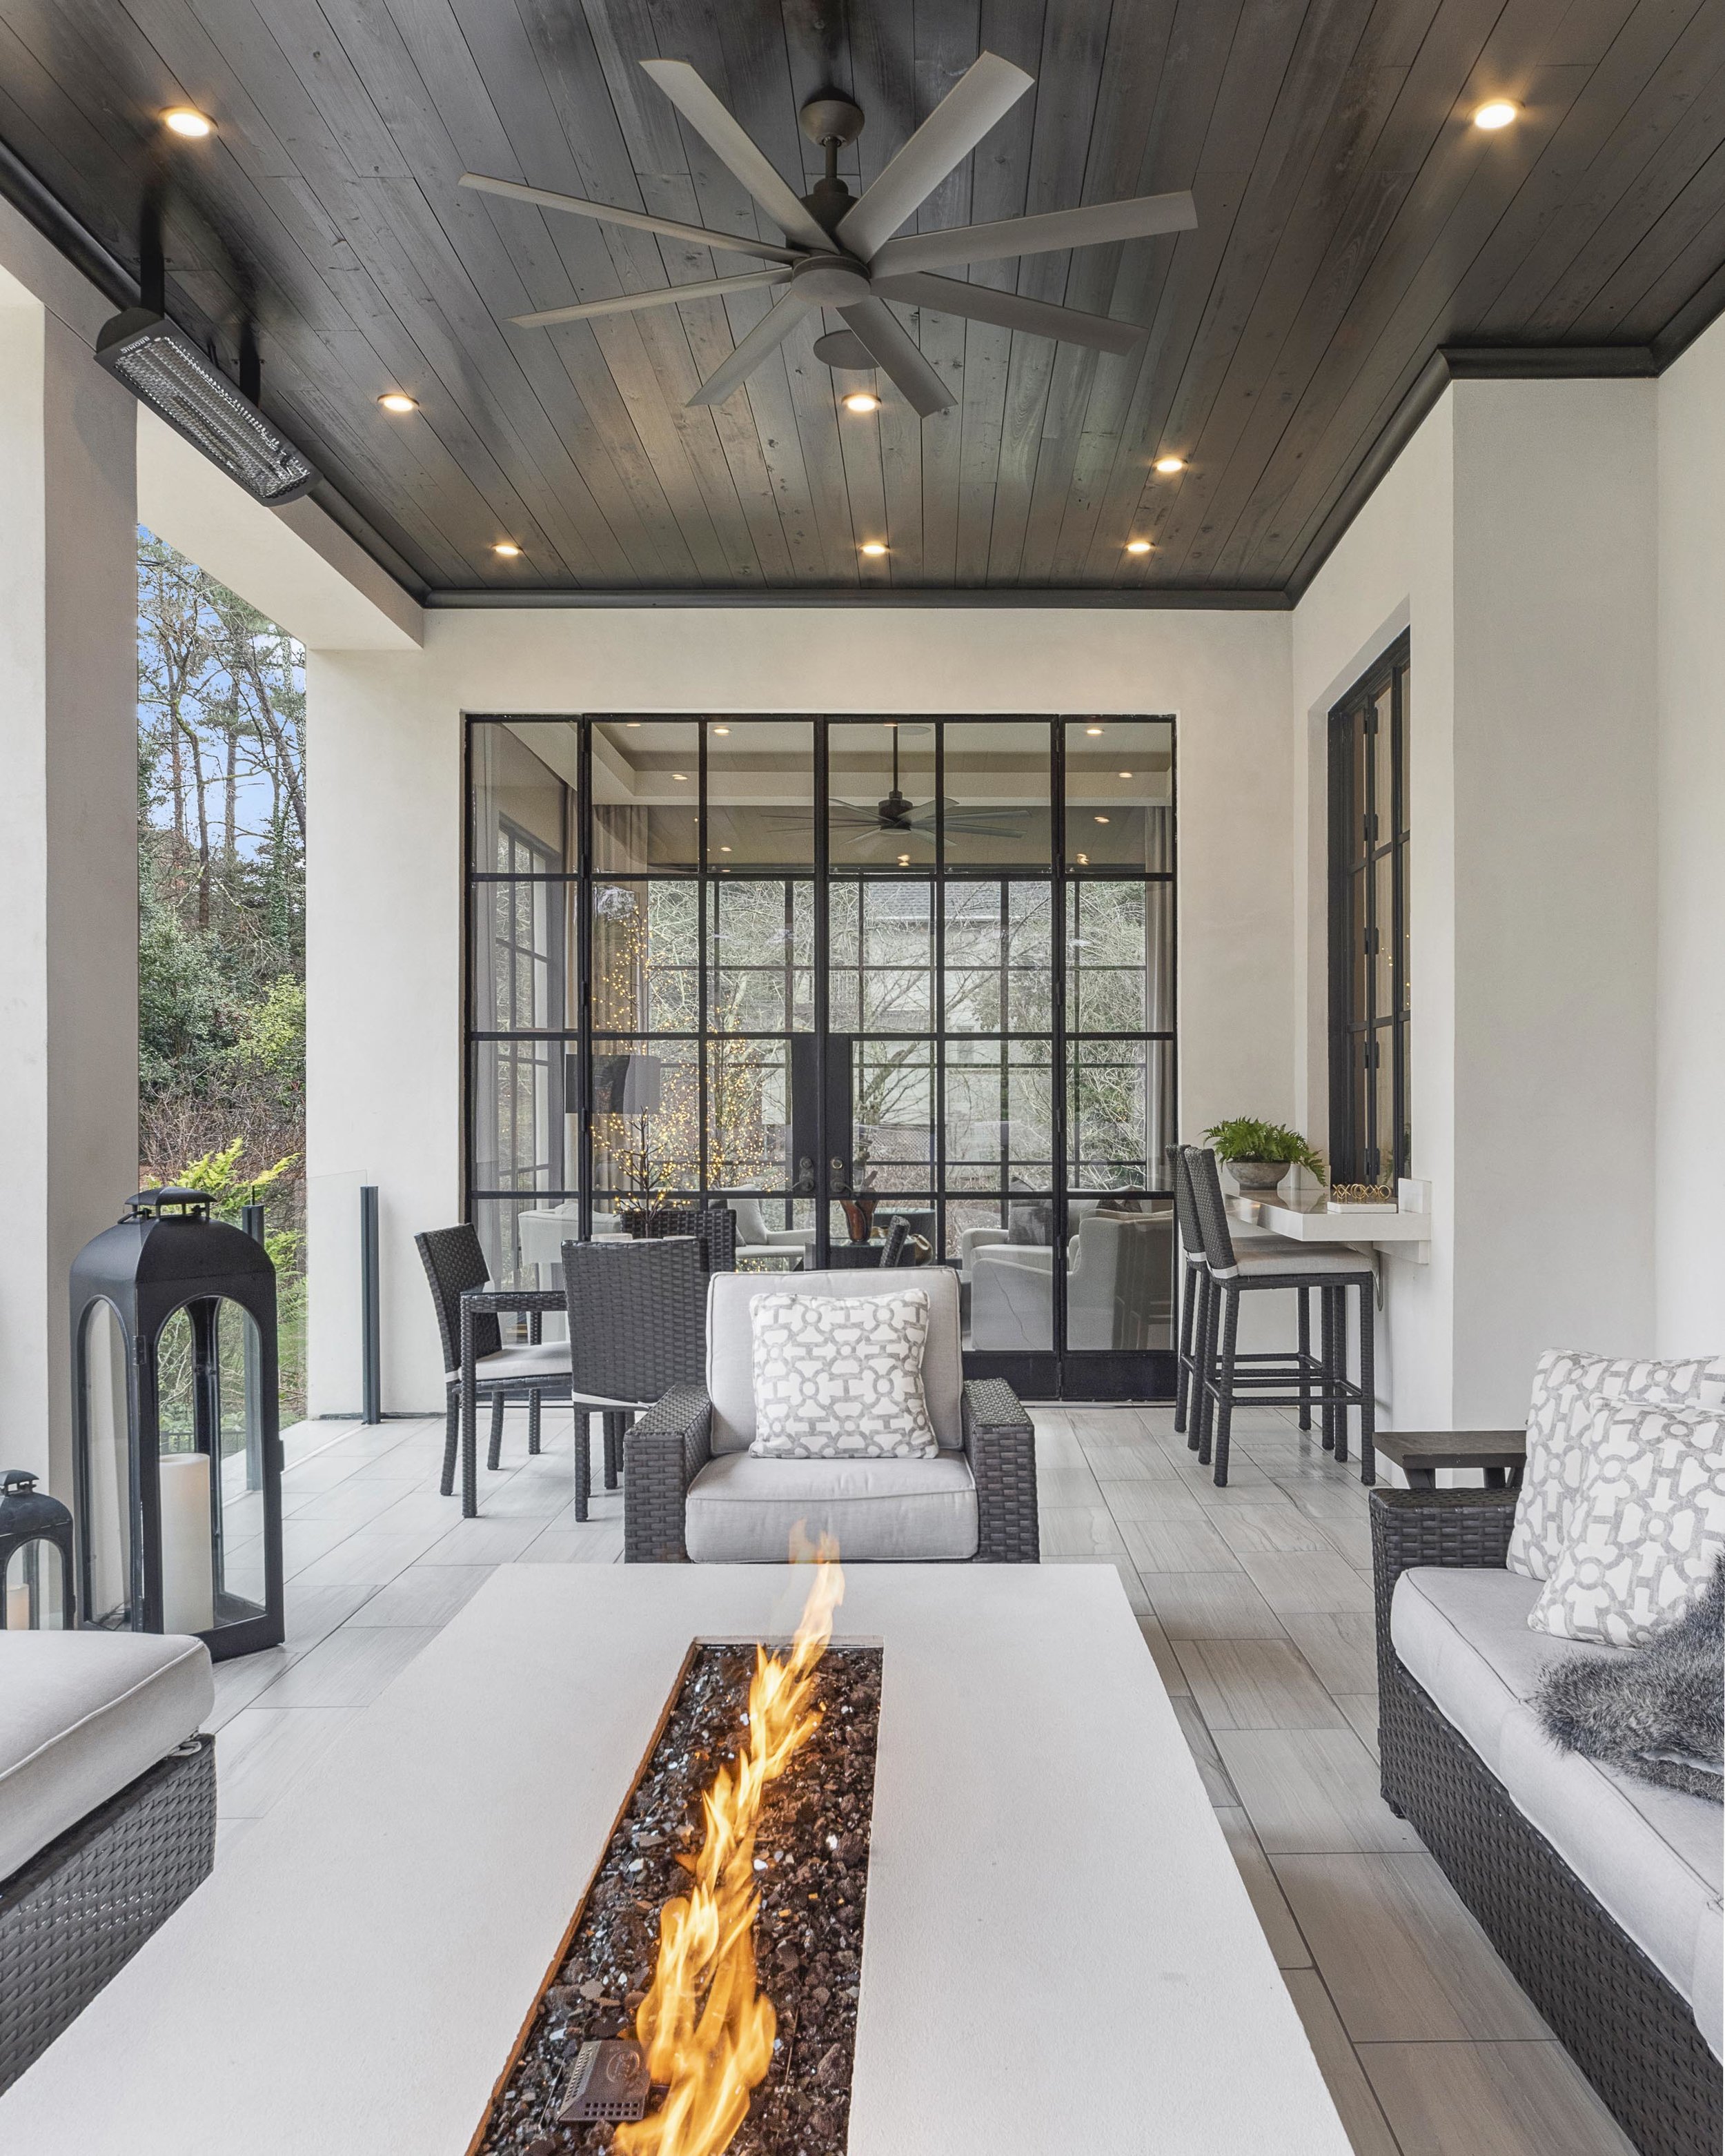 Habersham_outdoor room with fire feature.jpg